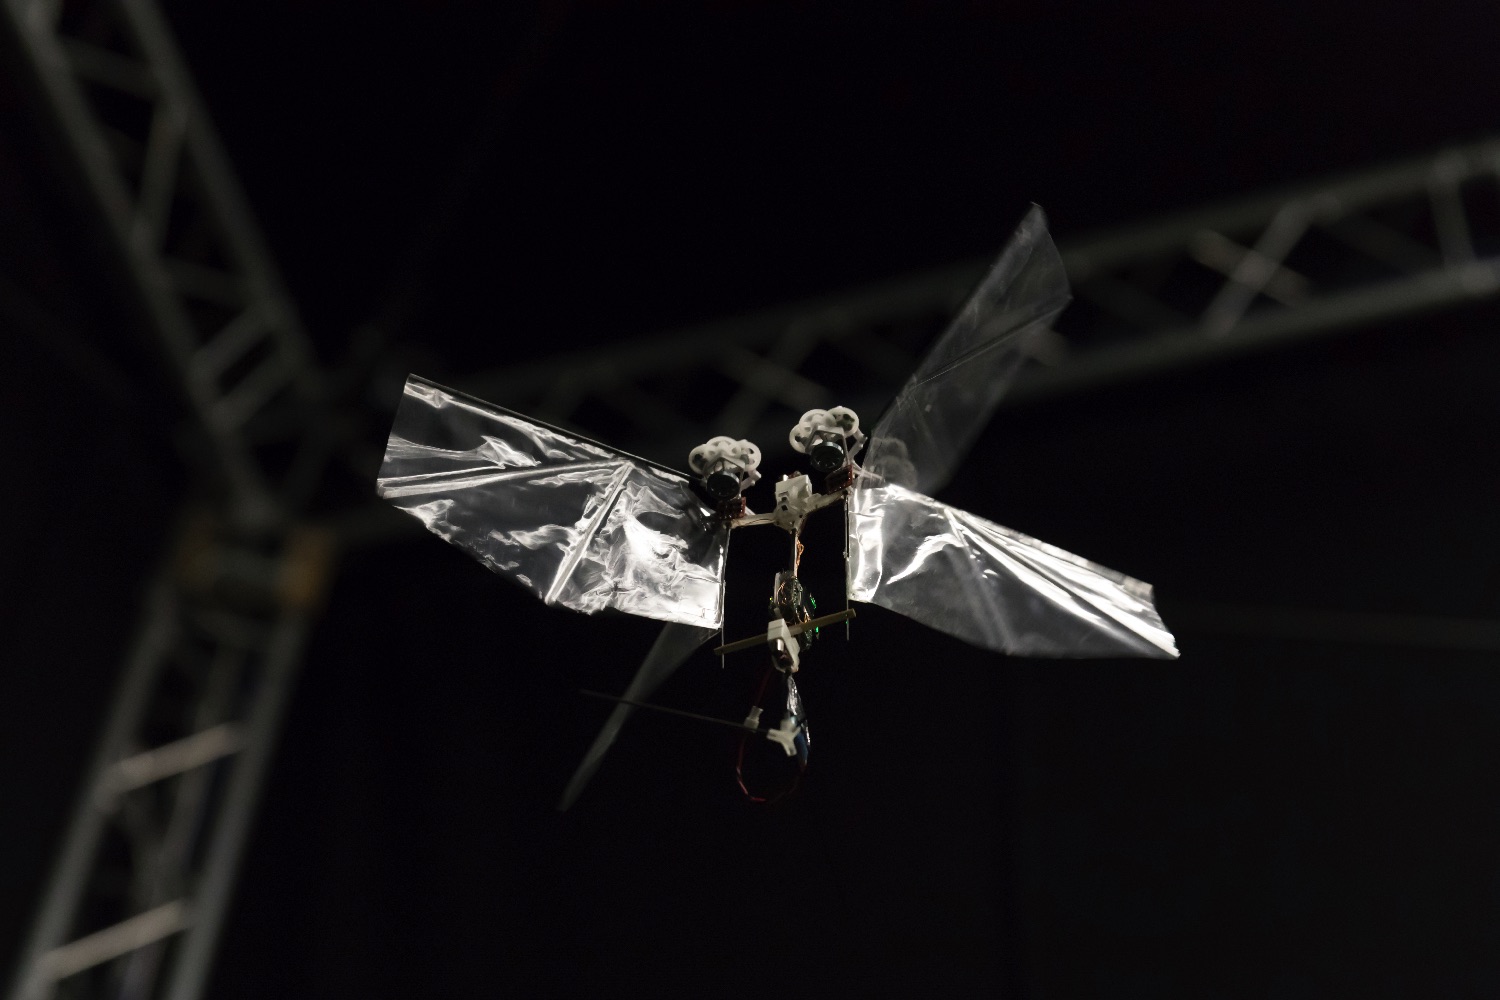 robot flaps just like a fruit fly 20180124 img 5902